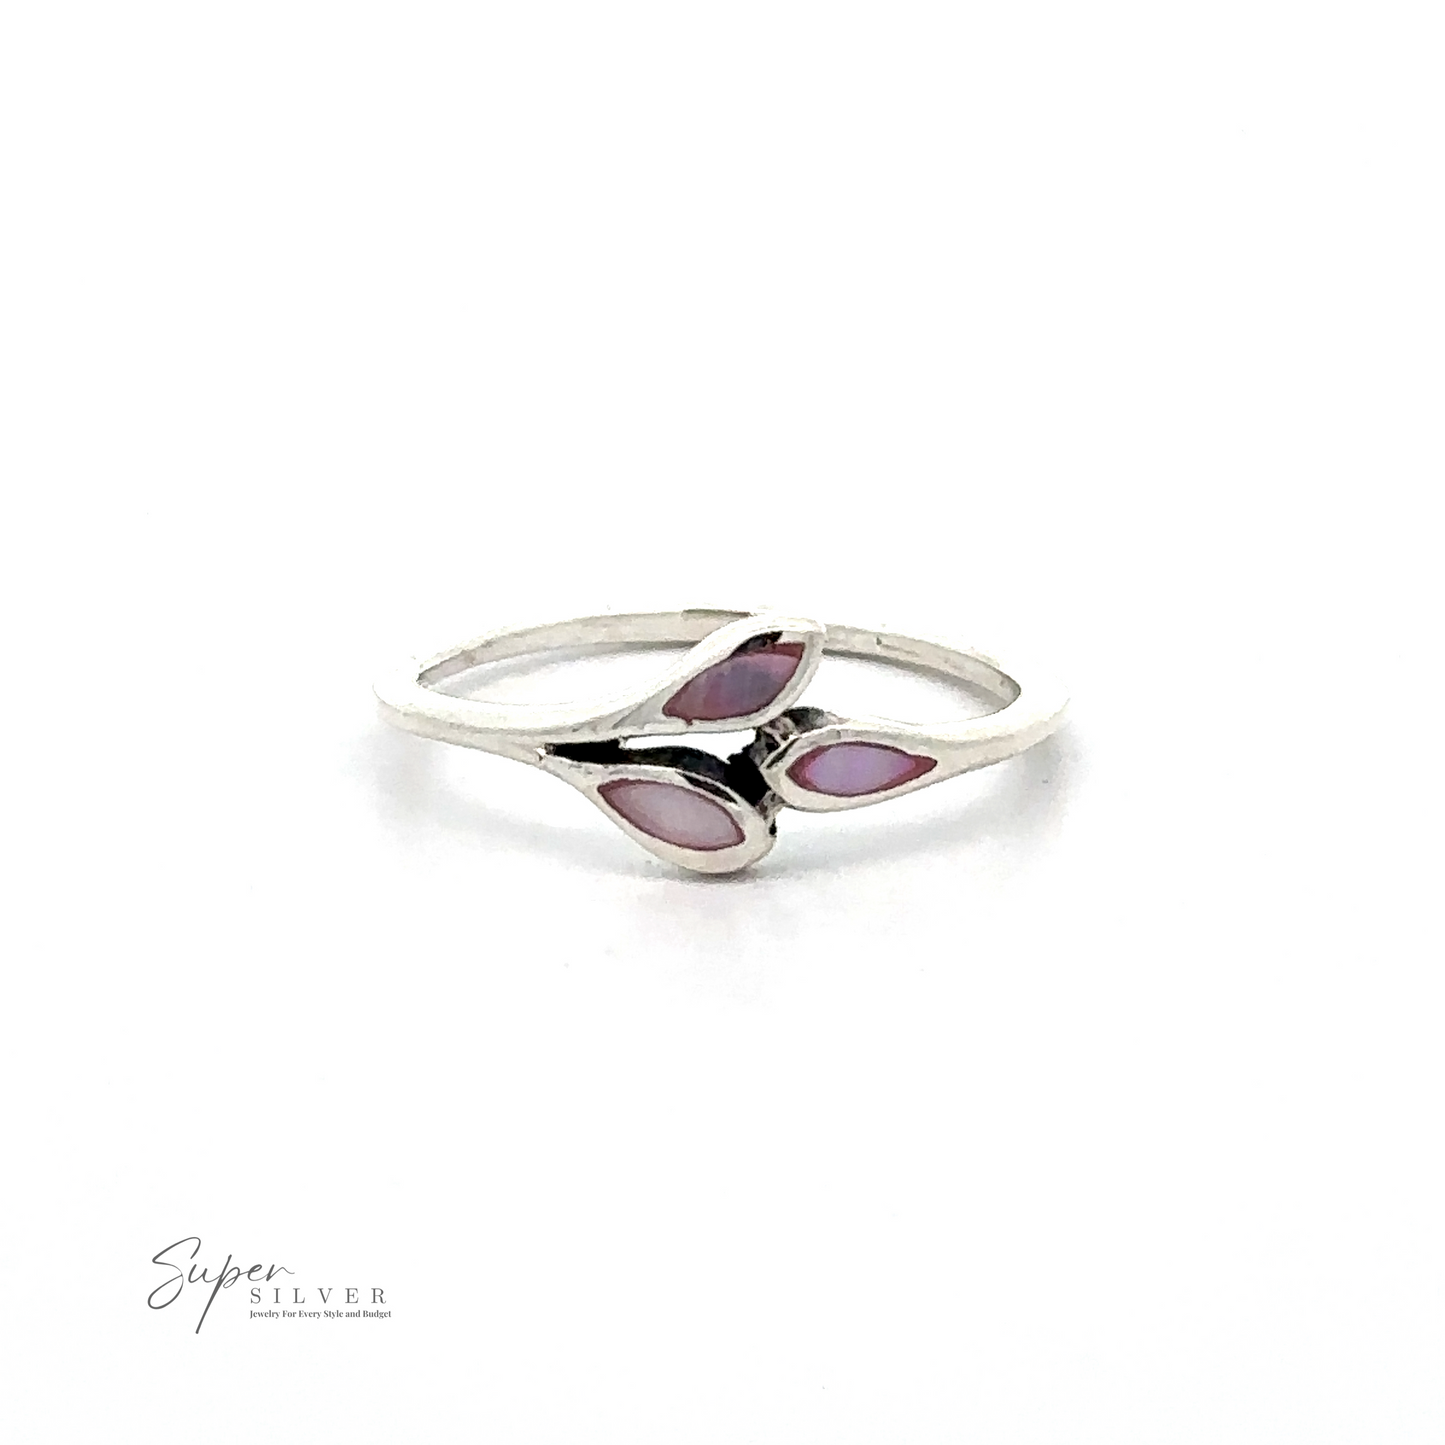 
                  
                    A Tiny Leaves Ring with Inlaid Stones with a design featuring three marquise-shaped purple stones arranged in a Tiny Leaf Design pattern. The "Super Silver" logo is visible in the bottom left corner.
                  
                